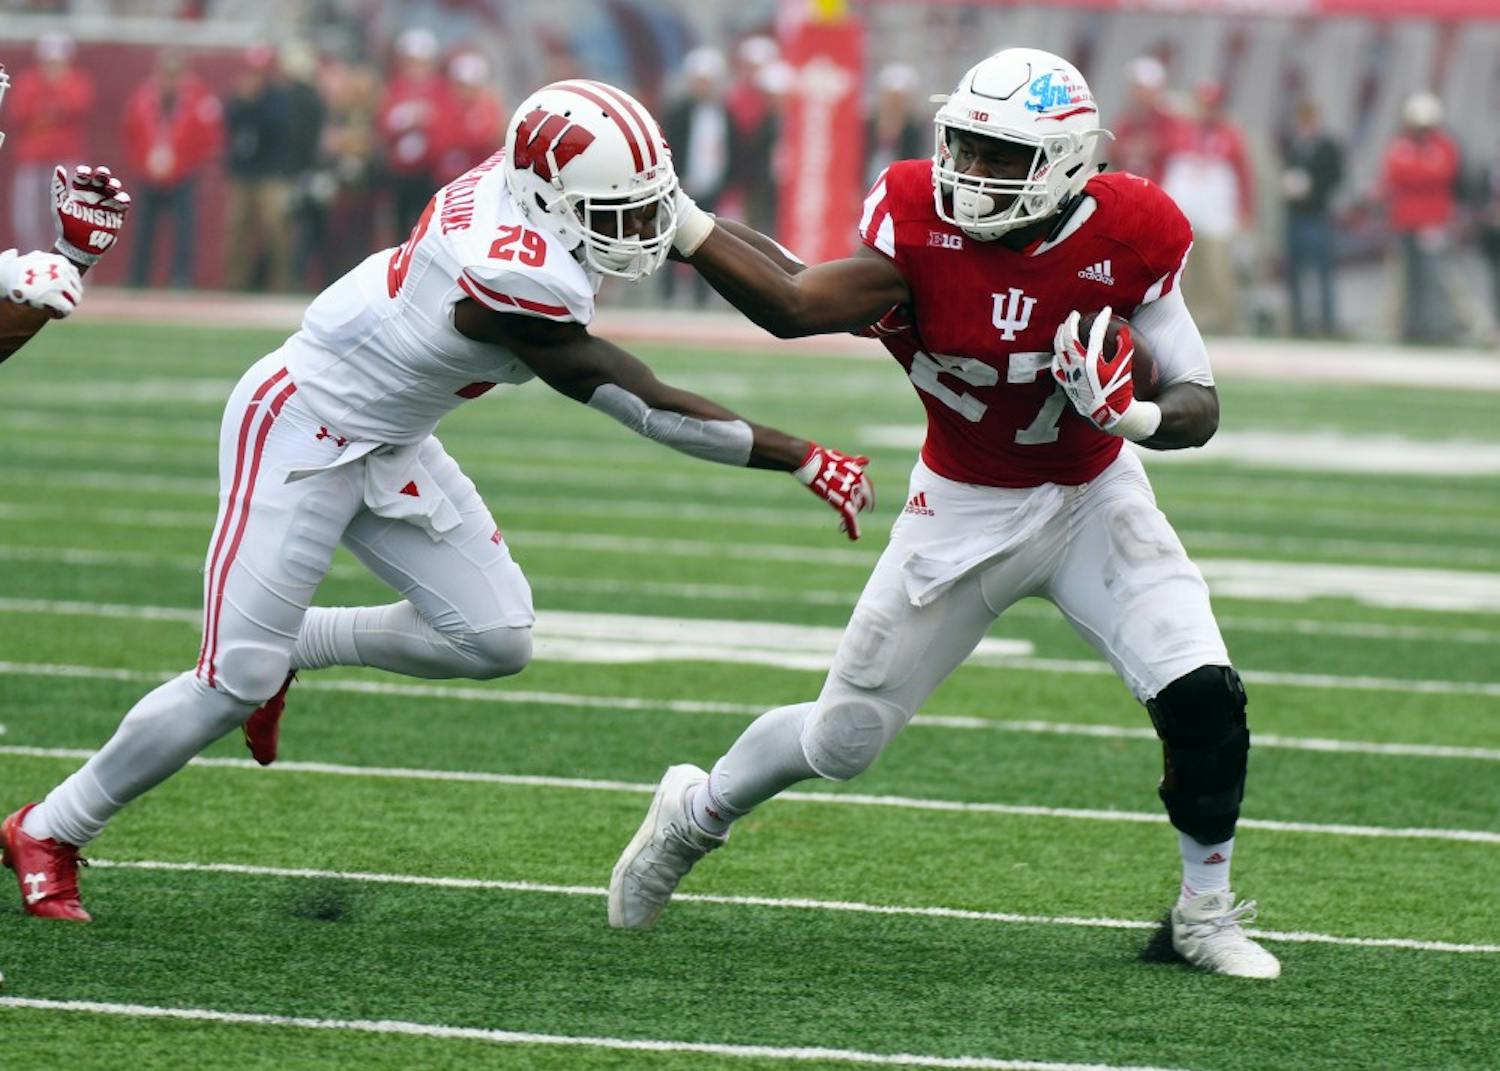 Then-freshman running back Morgan Ellison avoids being tackled during the first half against Wisconsin on Nov. 4, 2017, at Memorial Stadium. Ellison released a statement on Twitter stating that he was falsely accused of sexual assault.&nbsp;